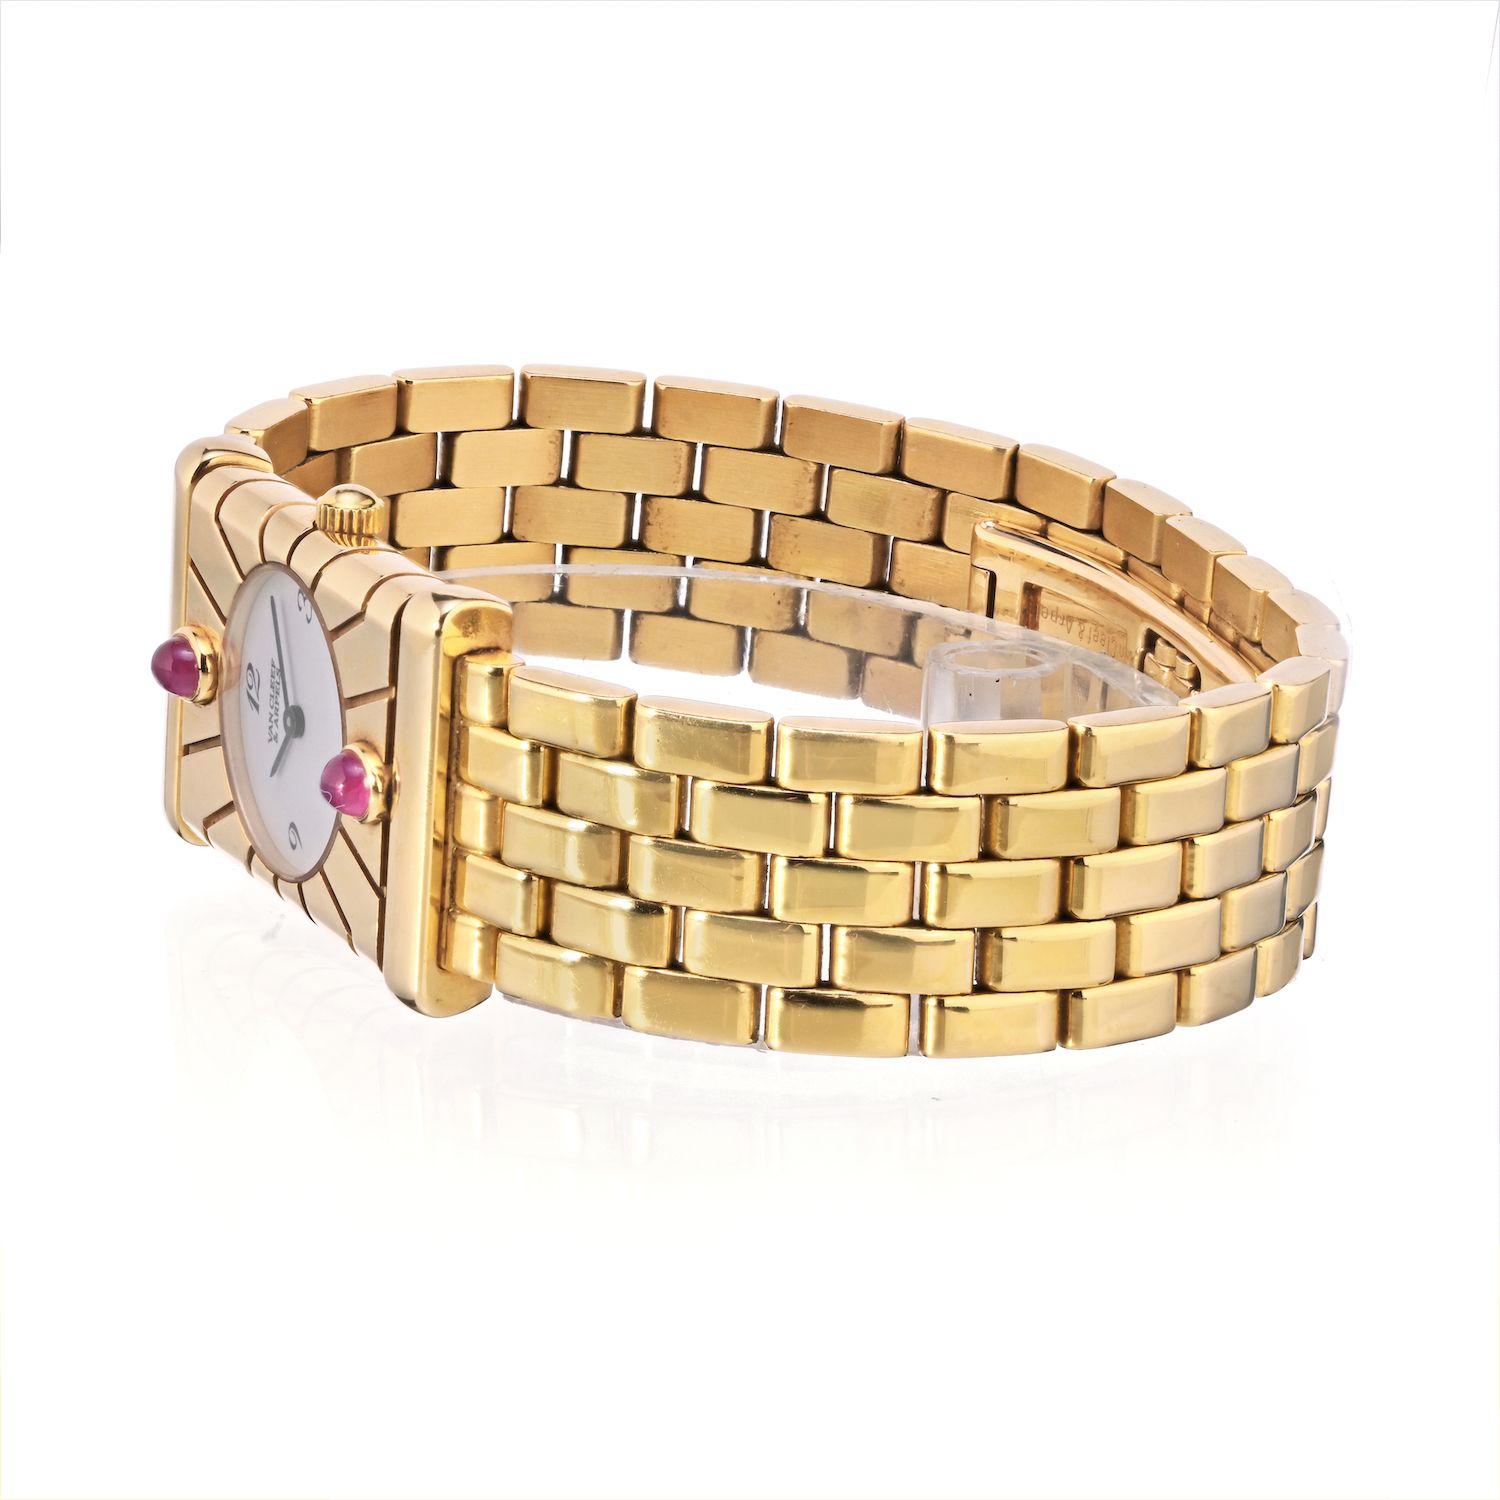 Van Cleef & Arpels Façade 18K Yellow Gold Vintage Watch - Quartz. 18K Yellow Gold (22 mm x 33 mm) with red cabochin rubies on bezel. White dial with Arabic numerals.
Wrist size 6.75 to 7.25 inch.